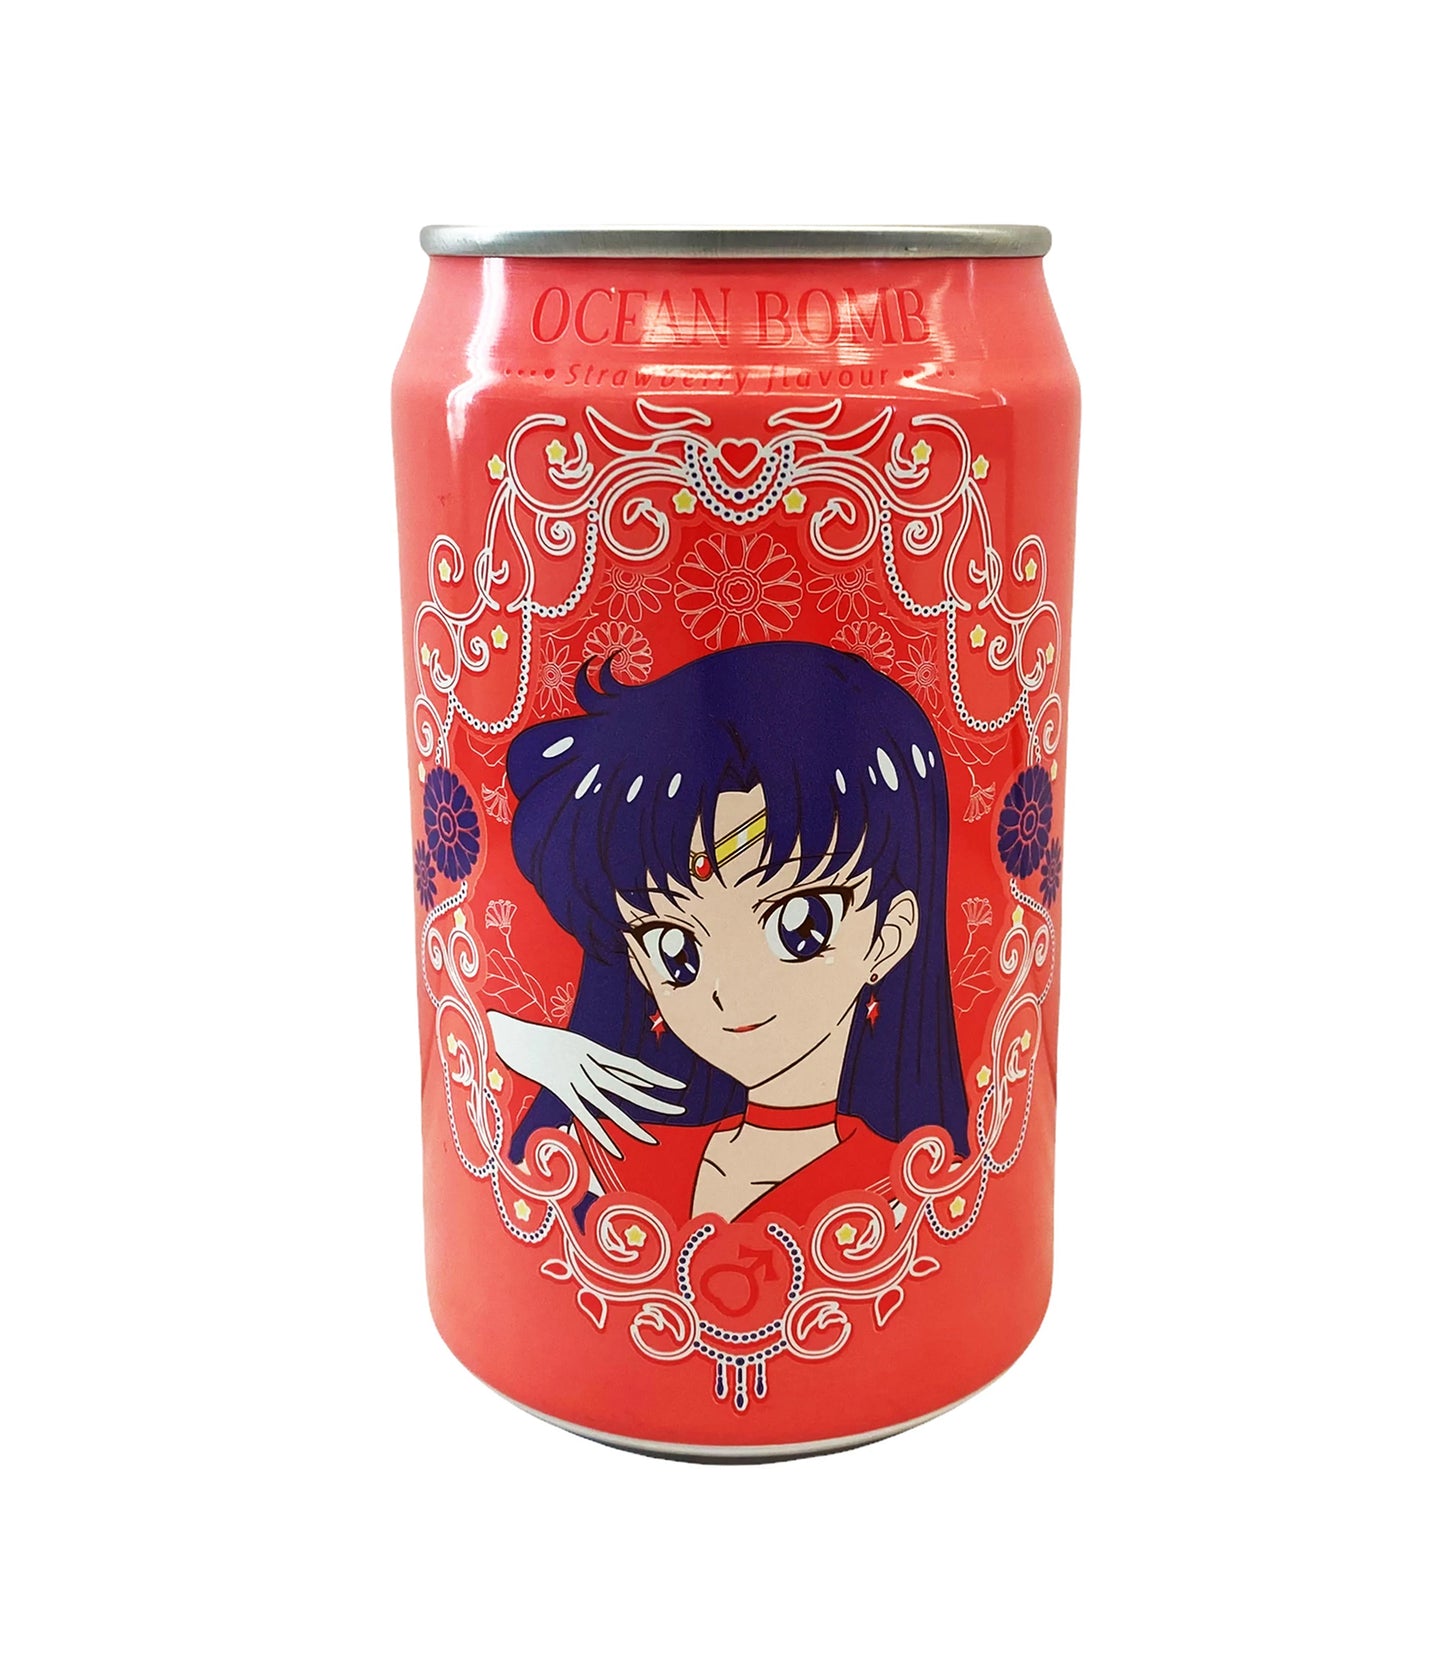 Ocean Bomb – Sailor Mars Sparkling Water (Strawberry Flavour) 330ml